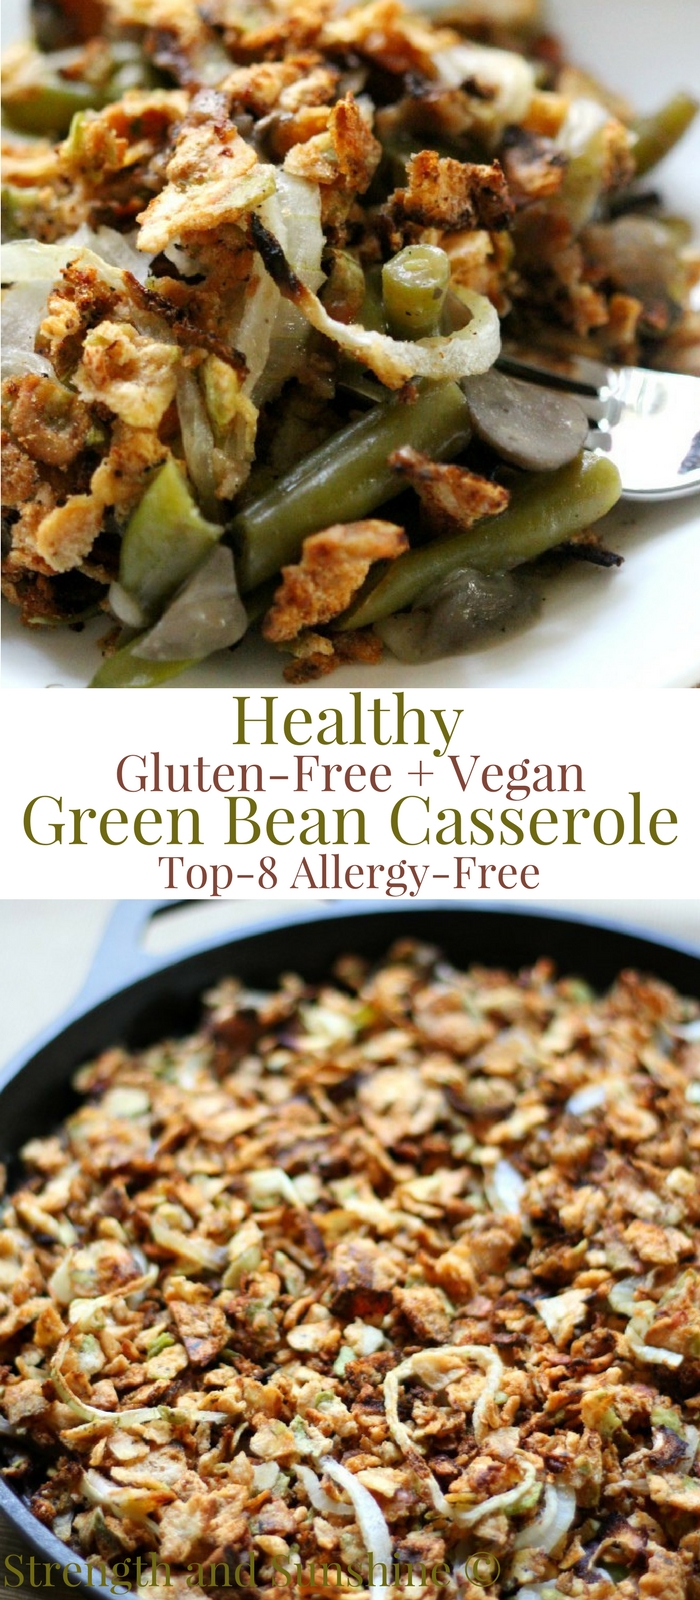 Healthy Gluten-Free + Vegan Green Bean Casserole (Allergy-Free) | Strength and Sunshine @RebeccaGF666 It's time to give that classic holiday side dish recipe a healthy makeover! This homemade Gluten-Free & Vegan Green Bean Casserole is top-8 allergy-free, has a crunchy baked onion topping, and creamy coconut milk and mushroom base! #glutenfree #vegan #greenbeancasserole #holidays #holidayrecipe #greenbeans #sidedish #allergyfree